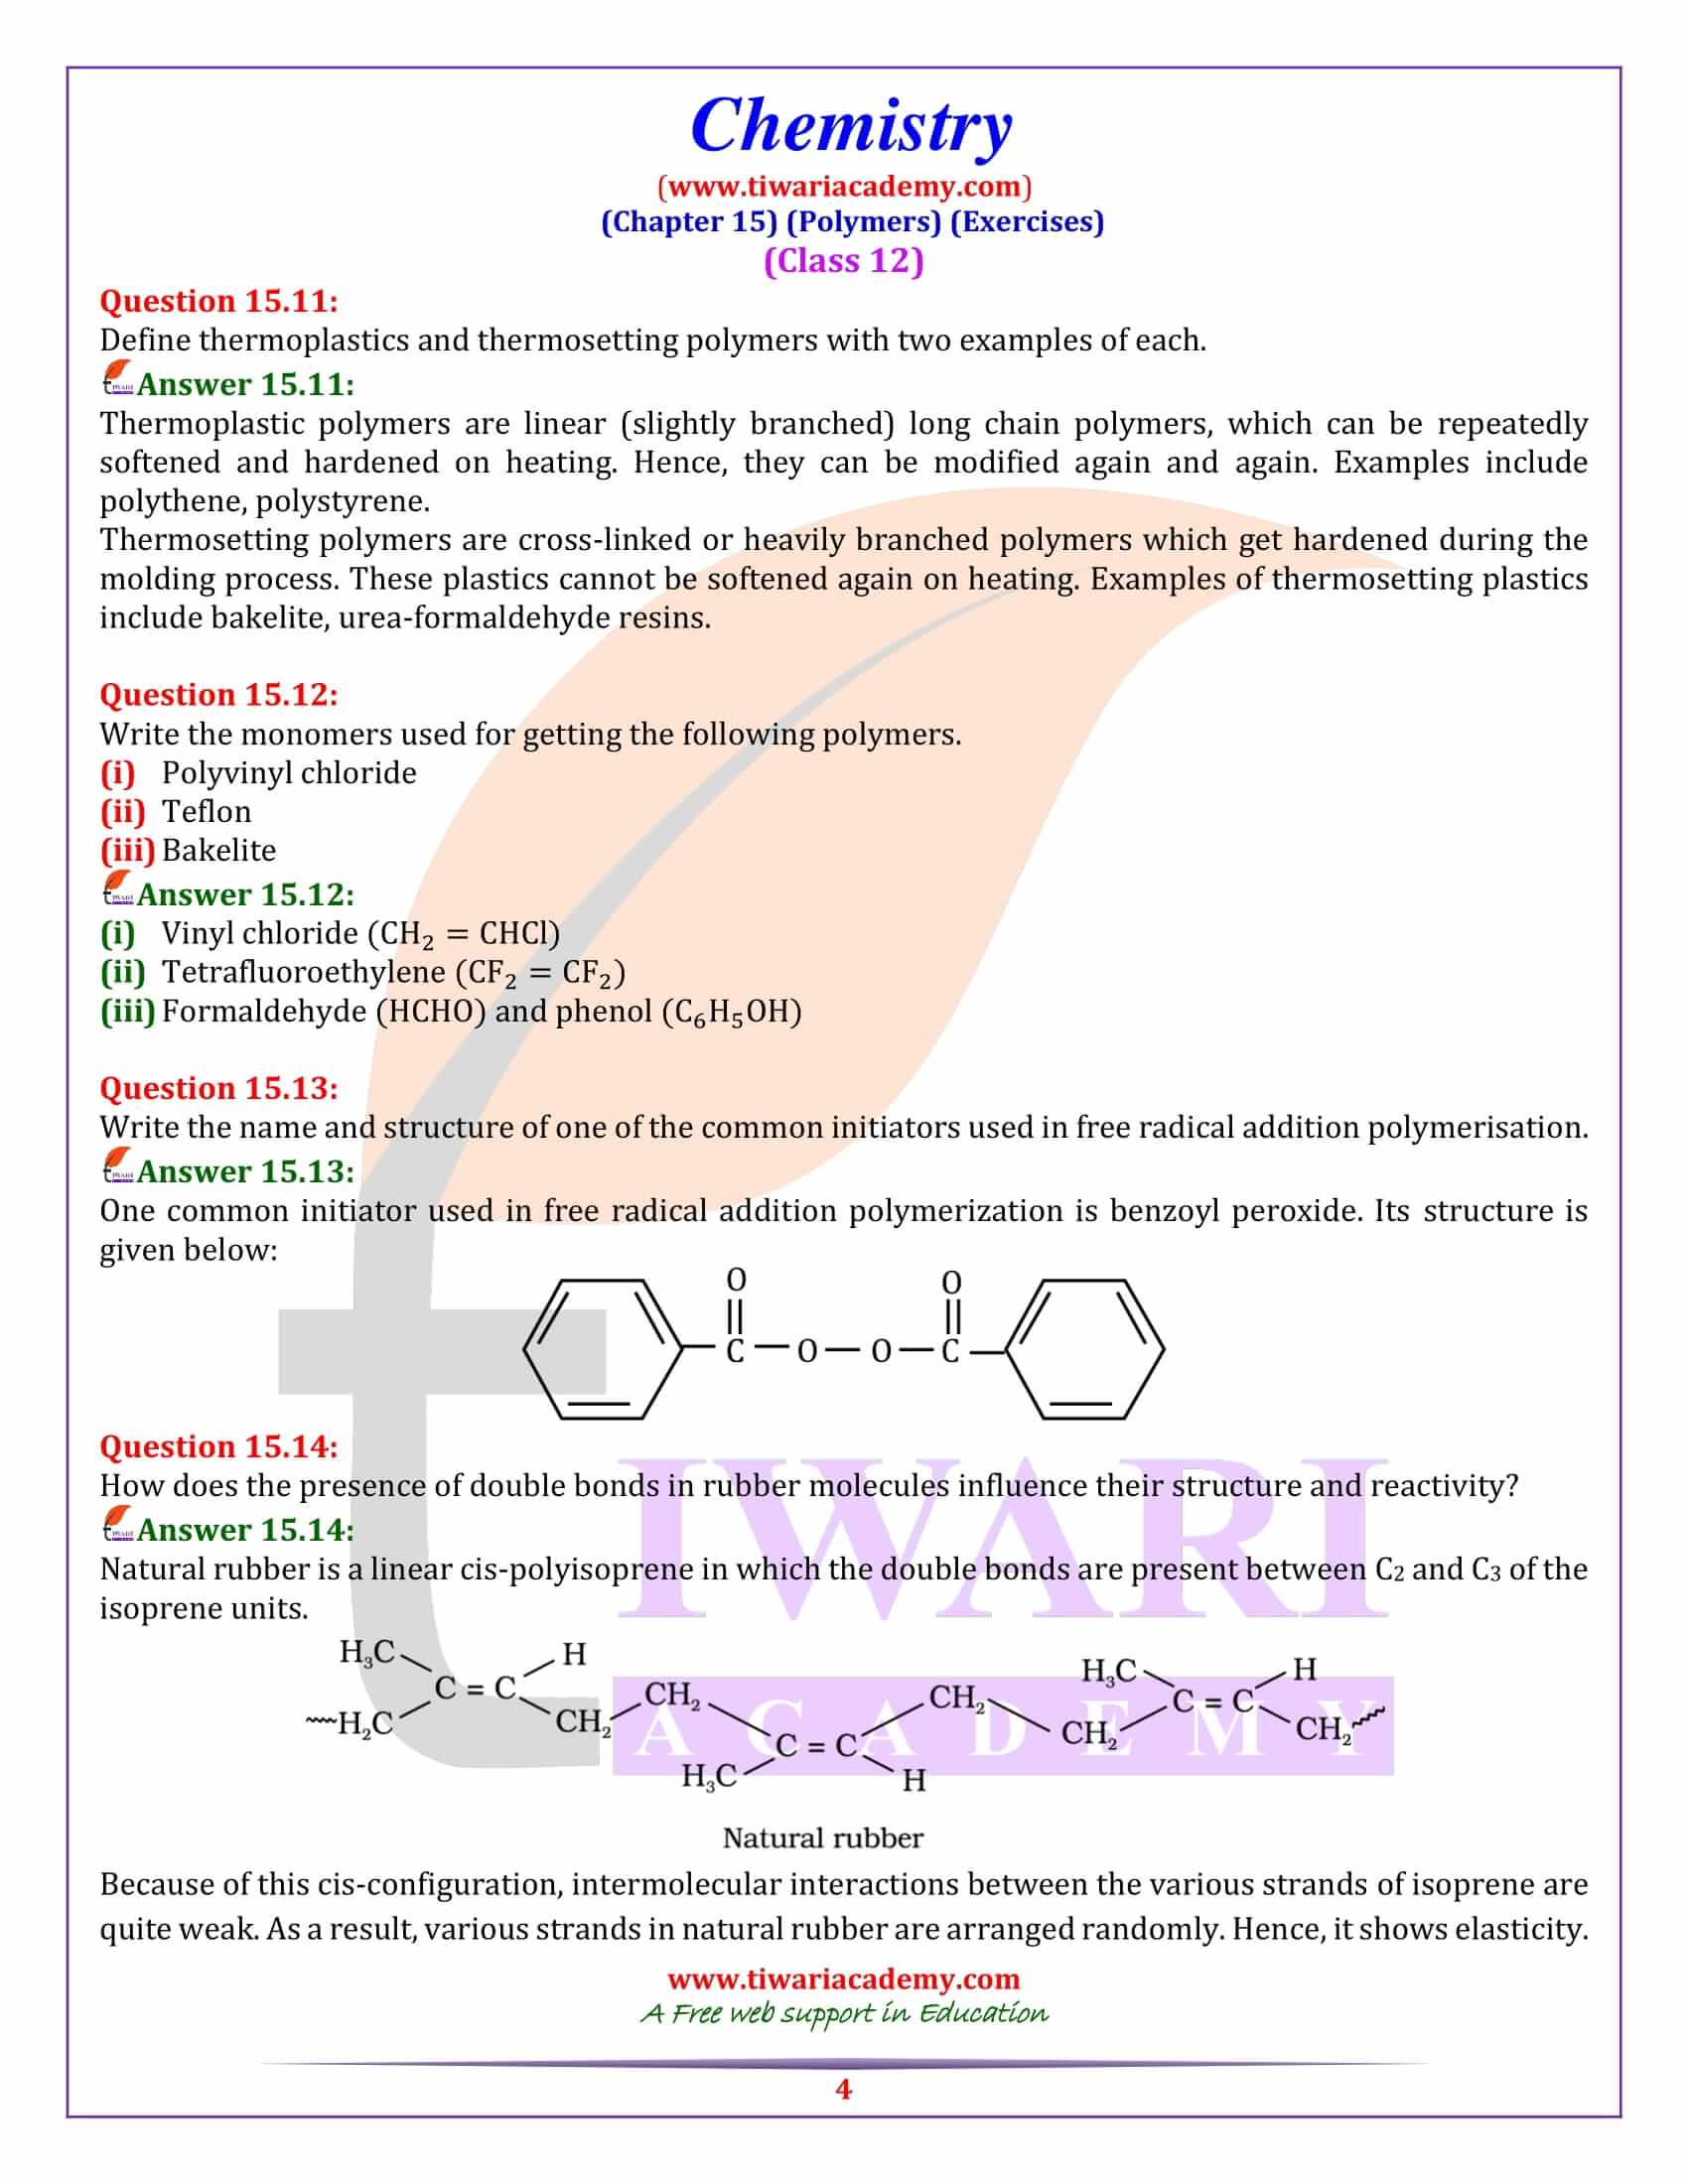 NCERT Solutions for Class 12 Chemistry Chapter 15 Exercises Answers